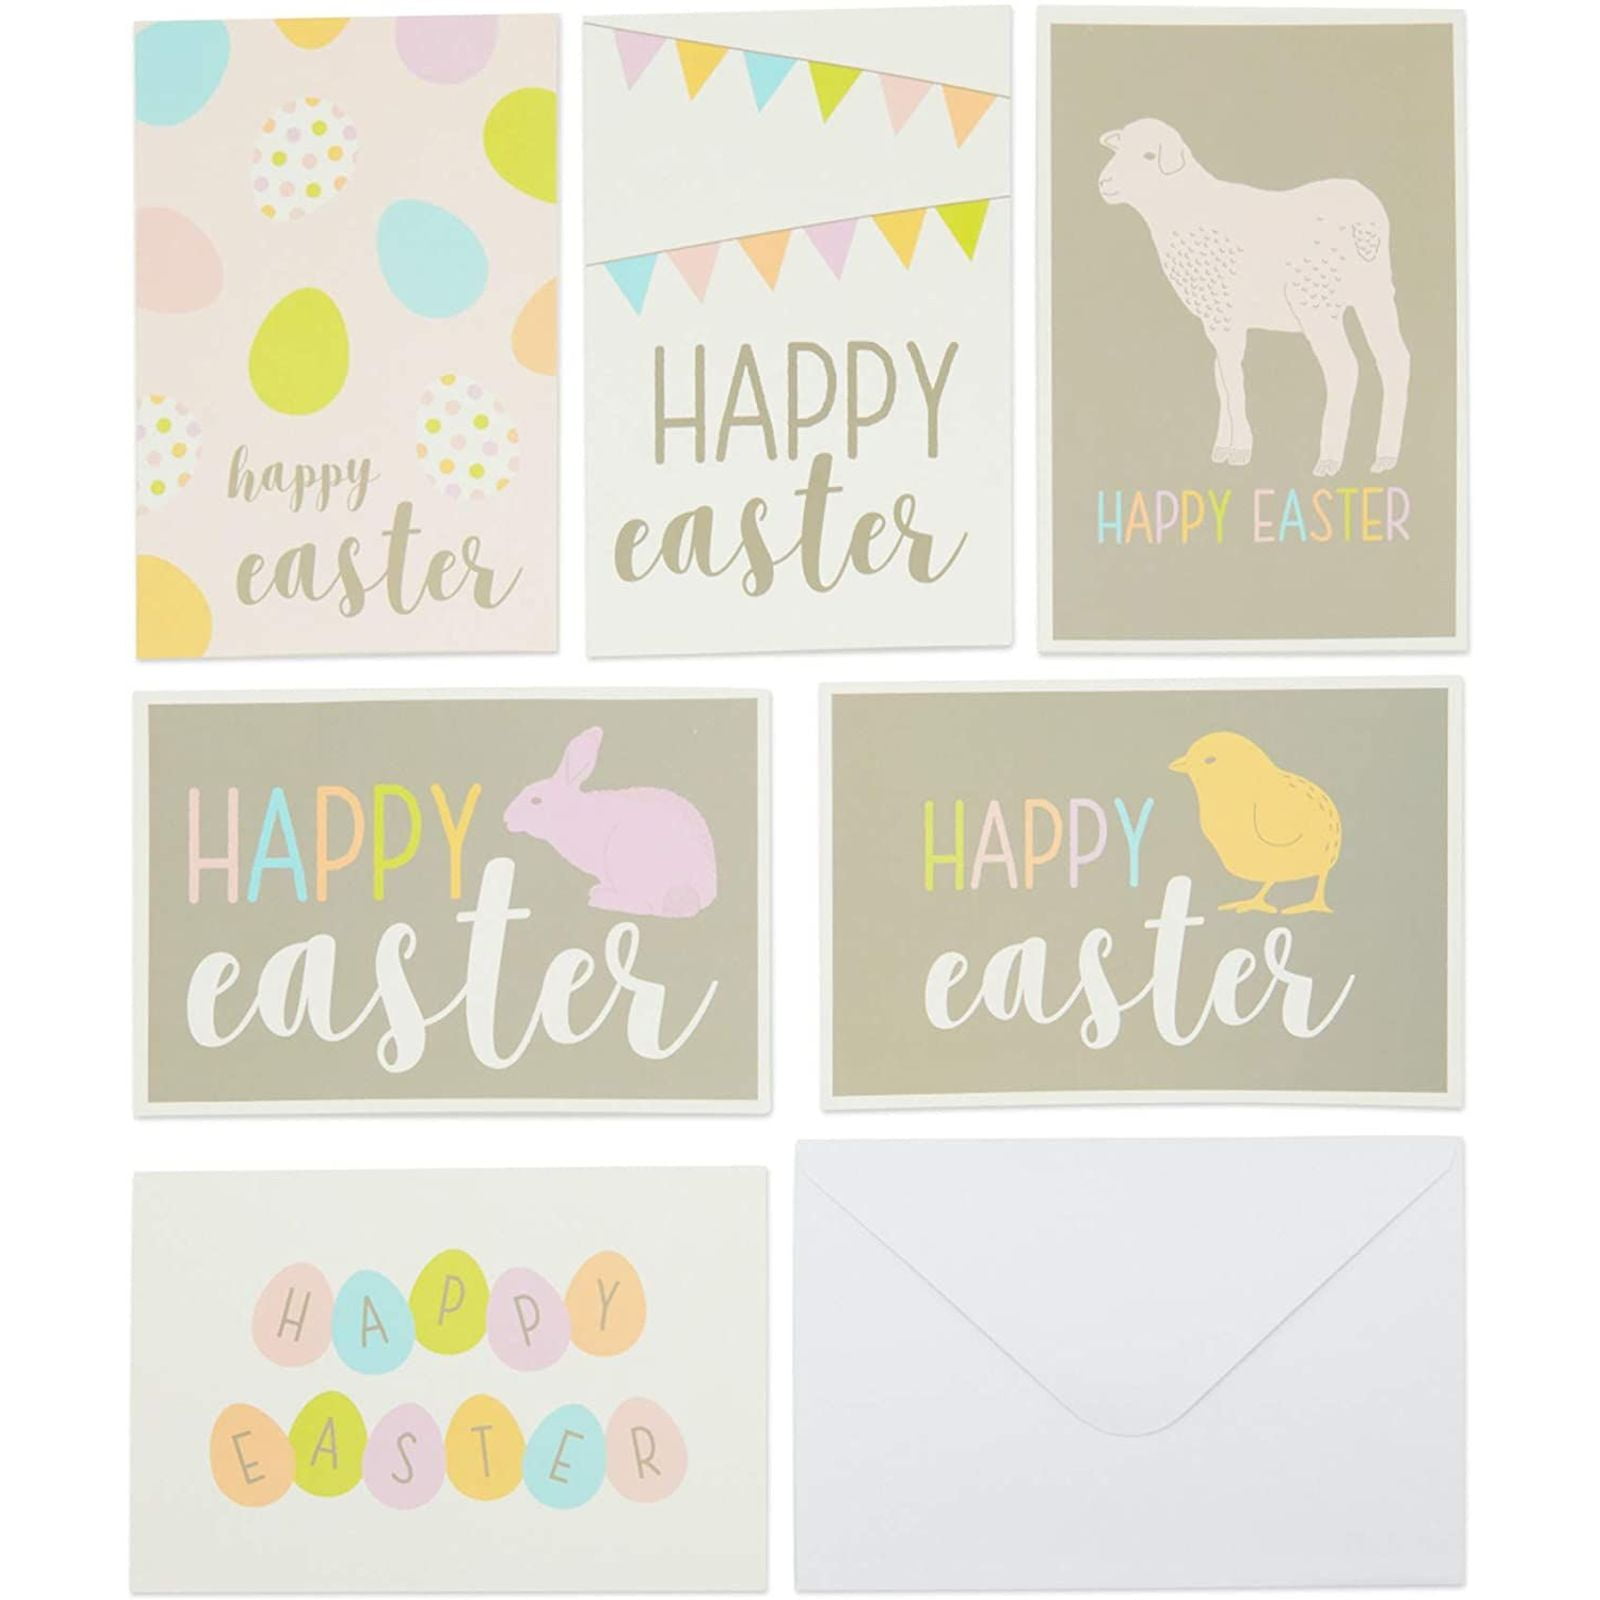 Blank Inside Egg Pack of 1 Bunny Floral Happy Easter Wishes Greeting Card Chick